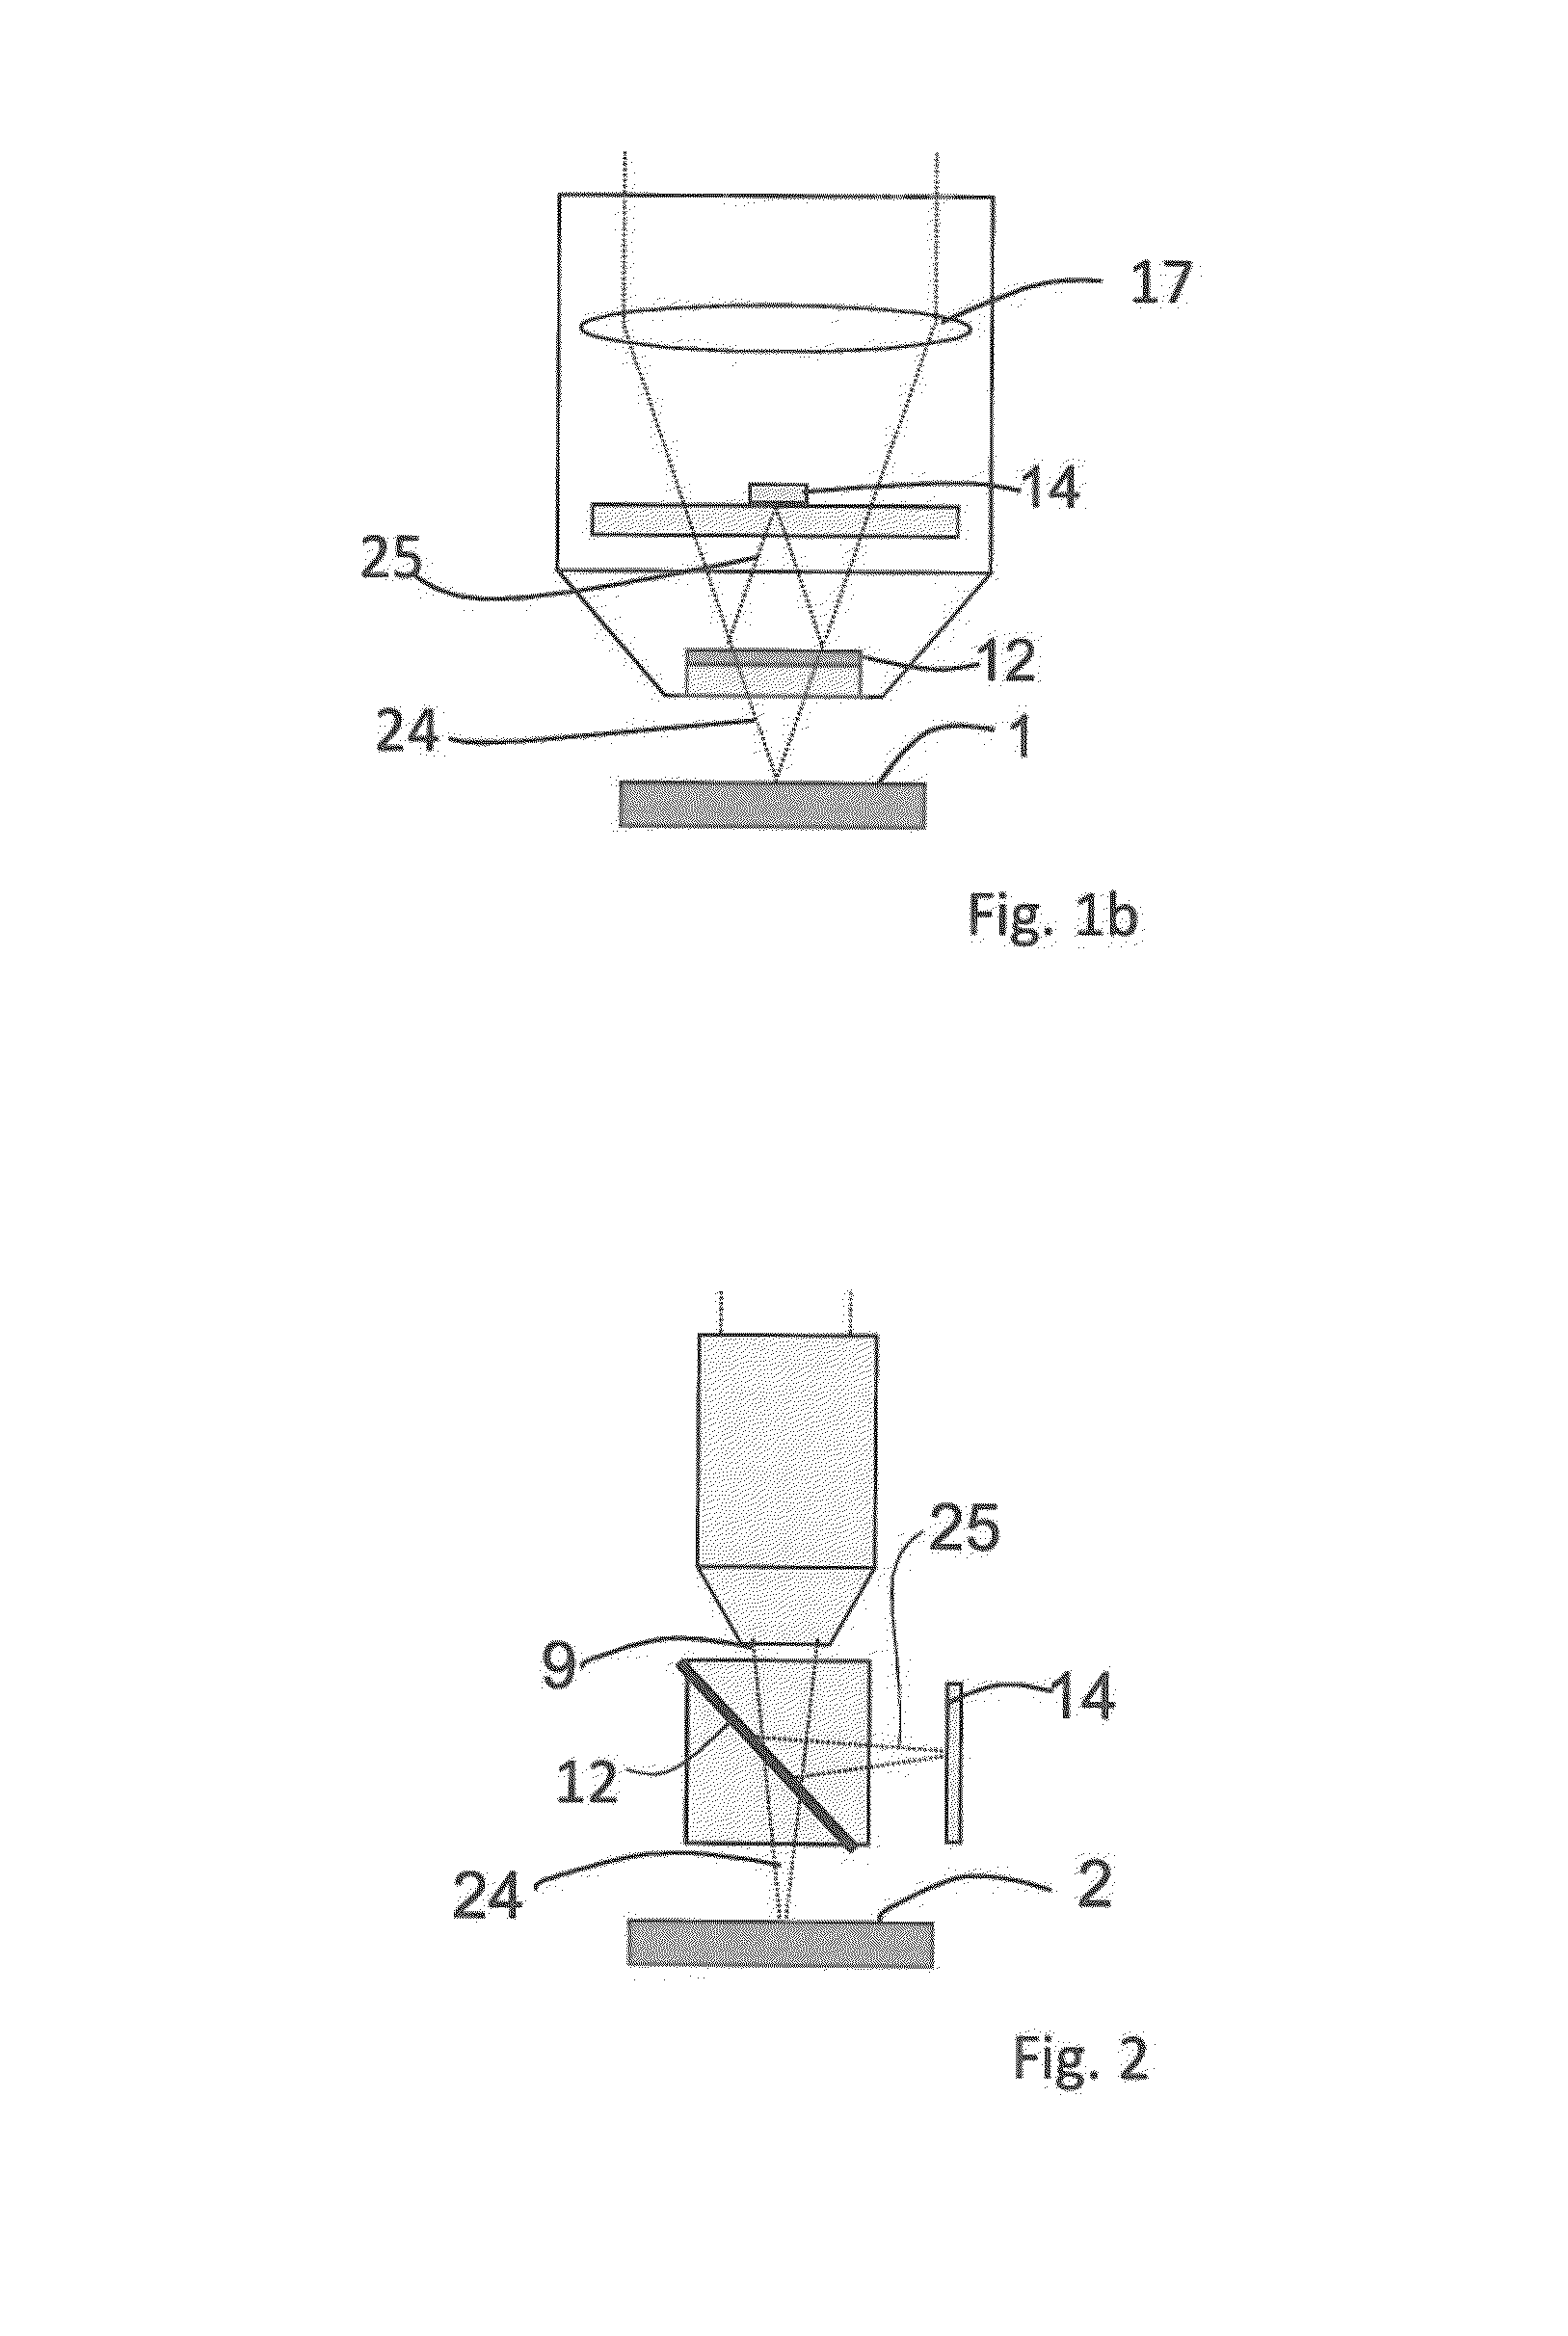 Interferometer system and method to generate an interference signal of a surface of a sample